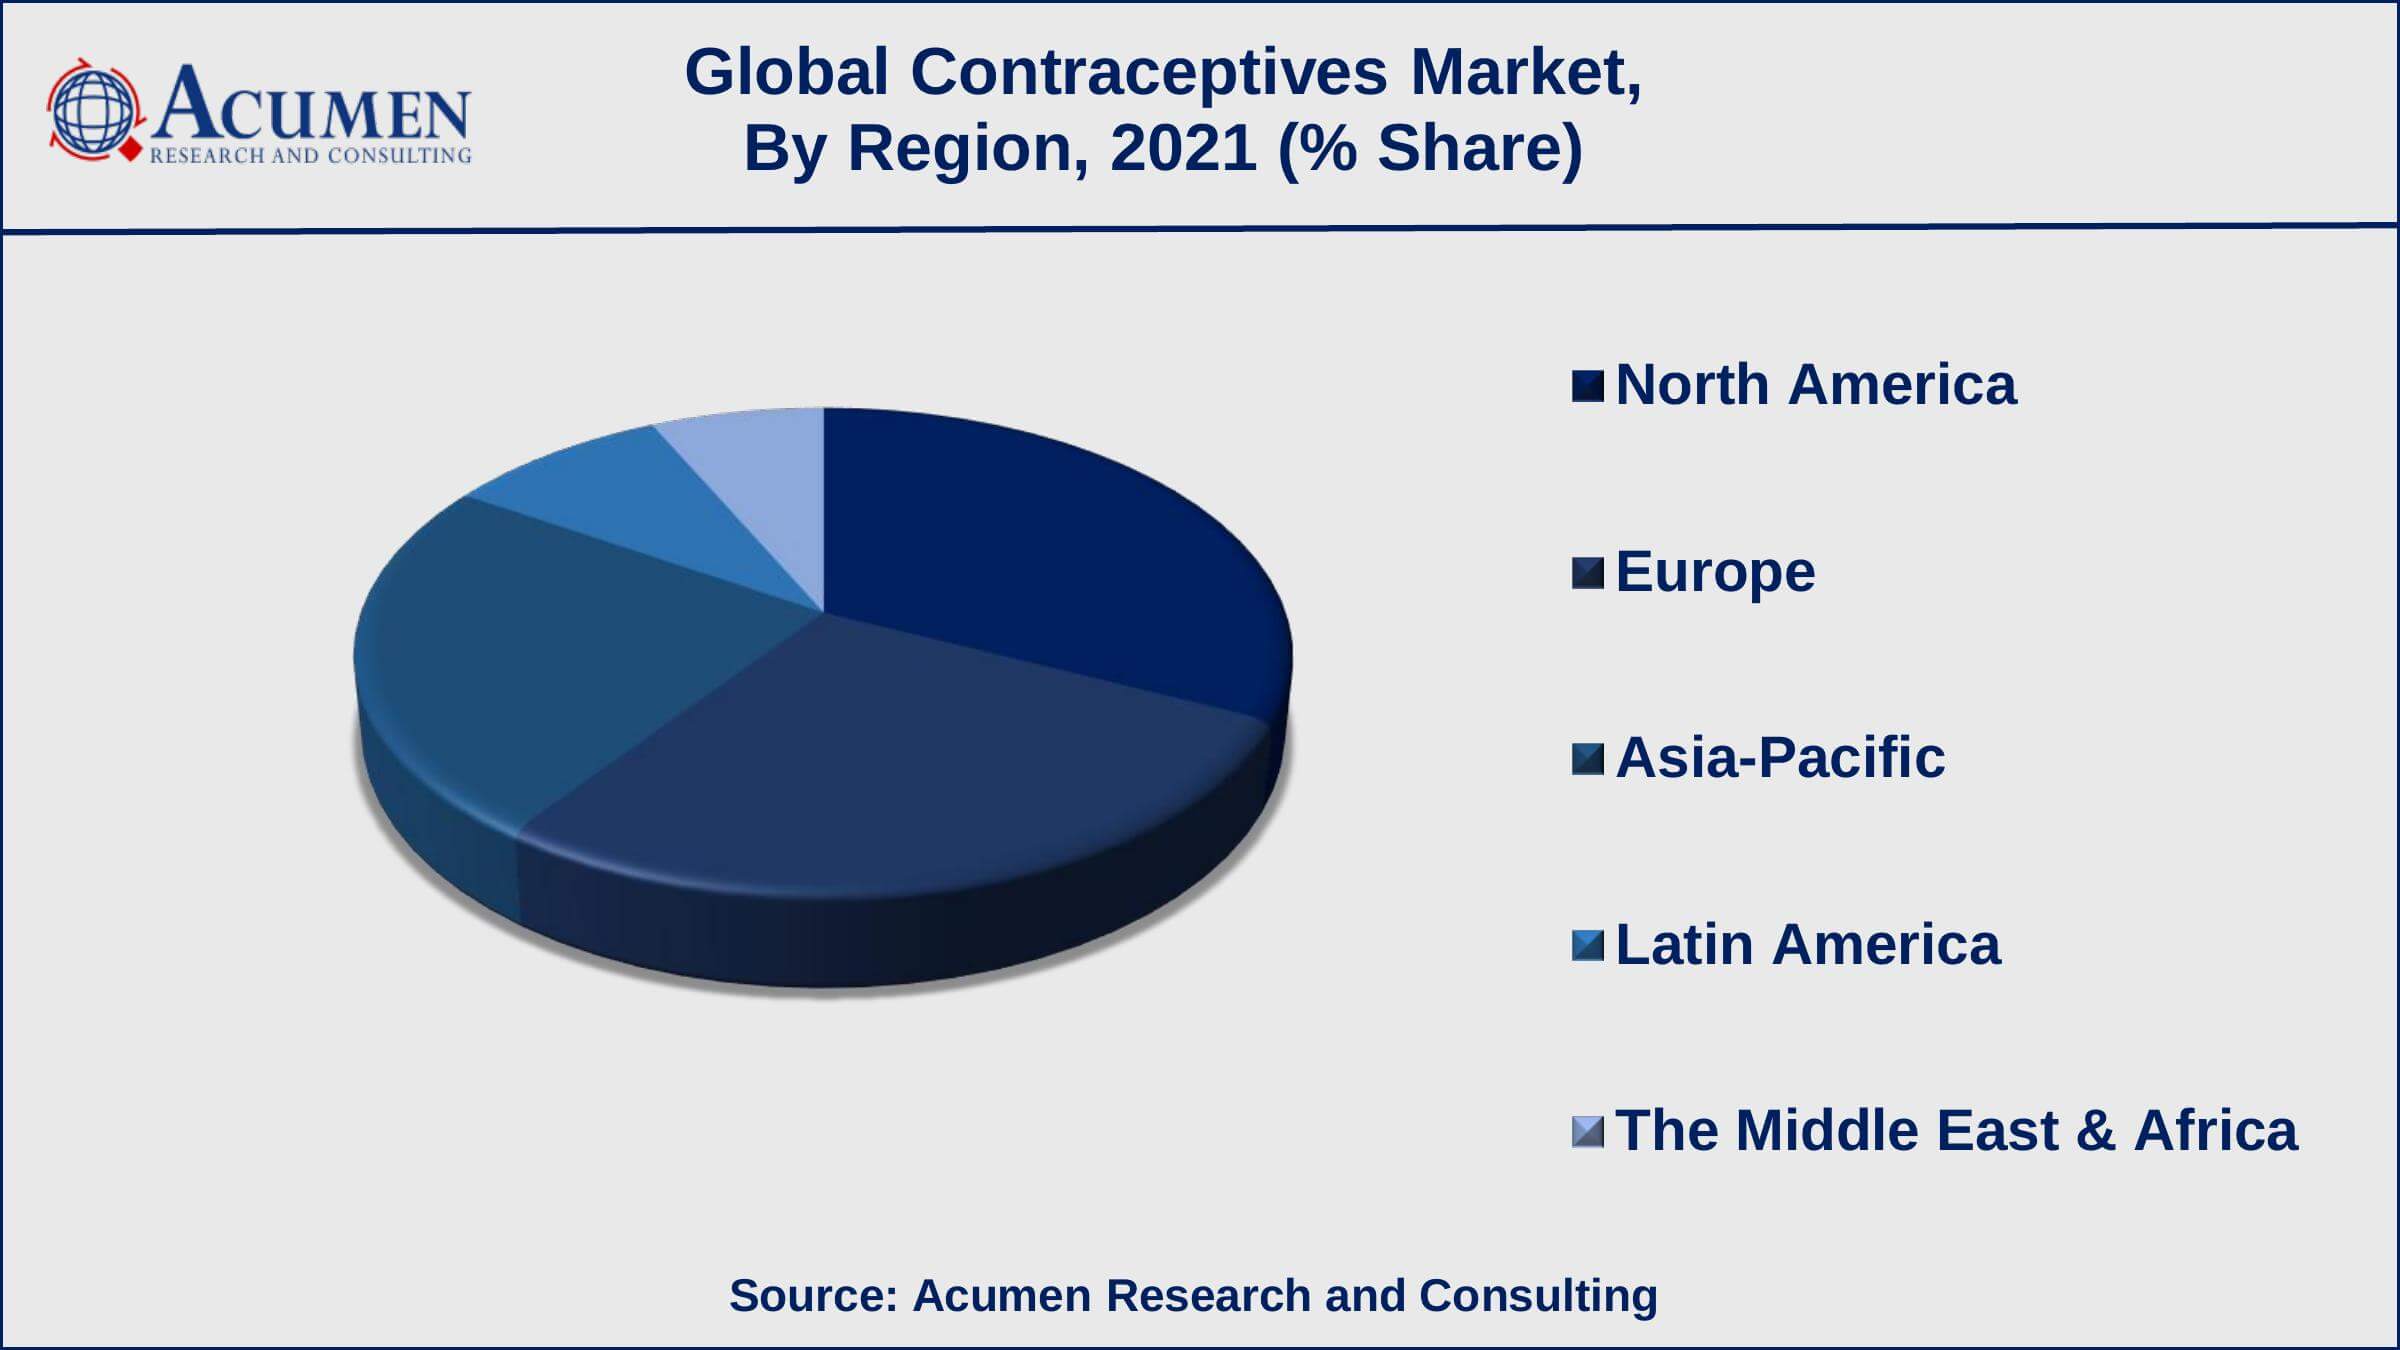 Growing awareness regarding family planning is a popular contraceptives market trend that fuels the industry demand